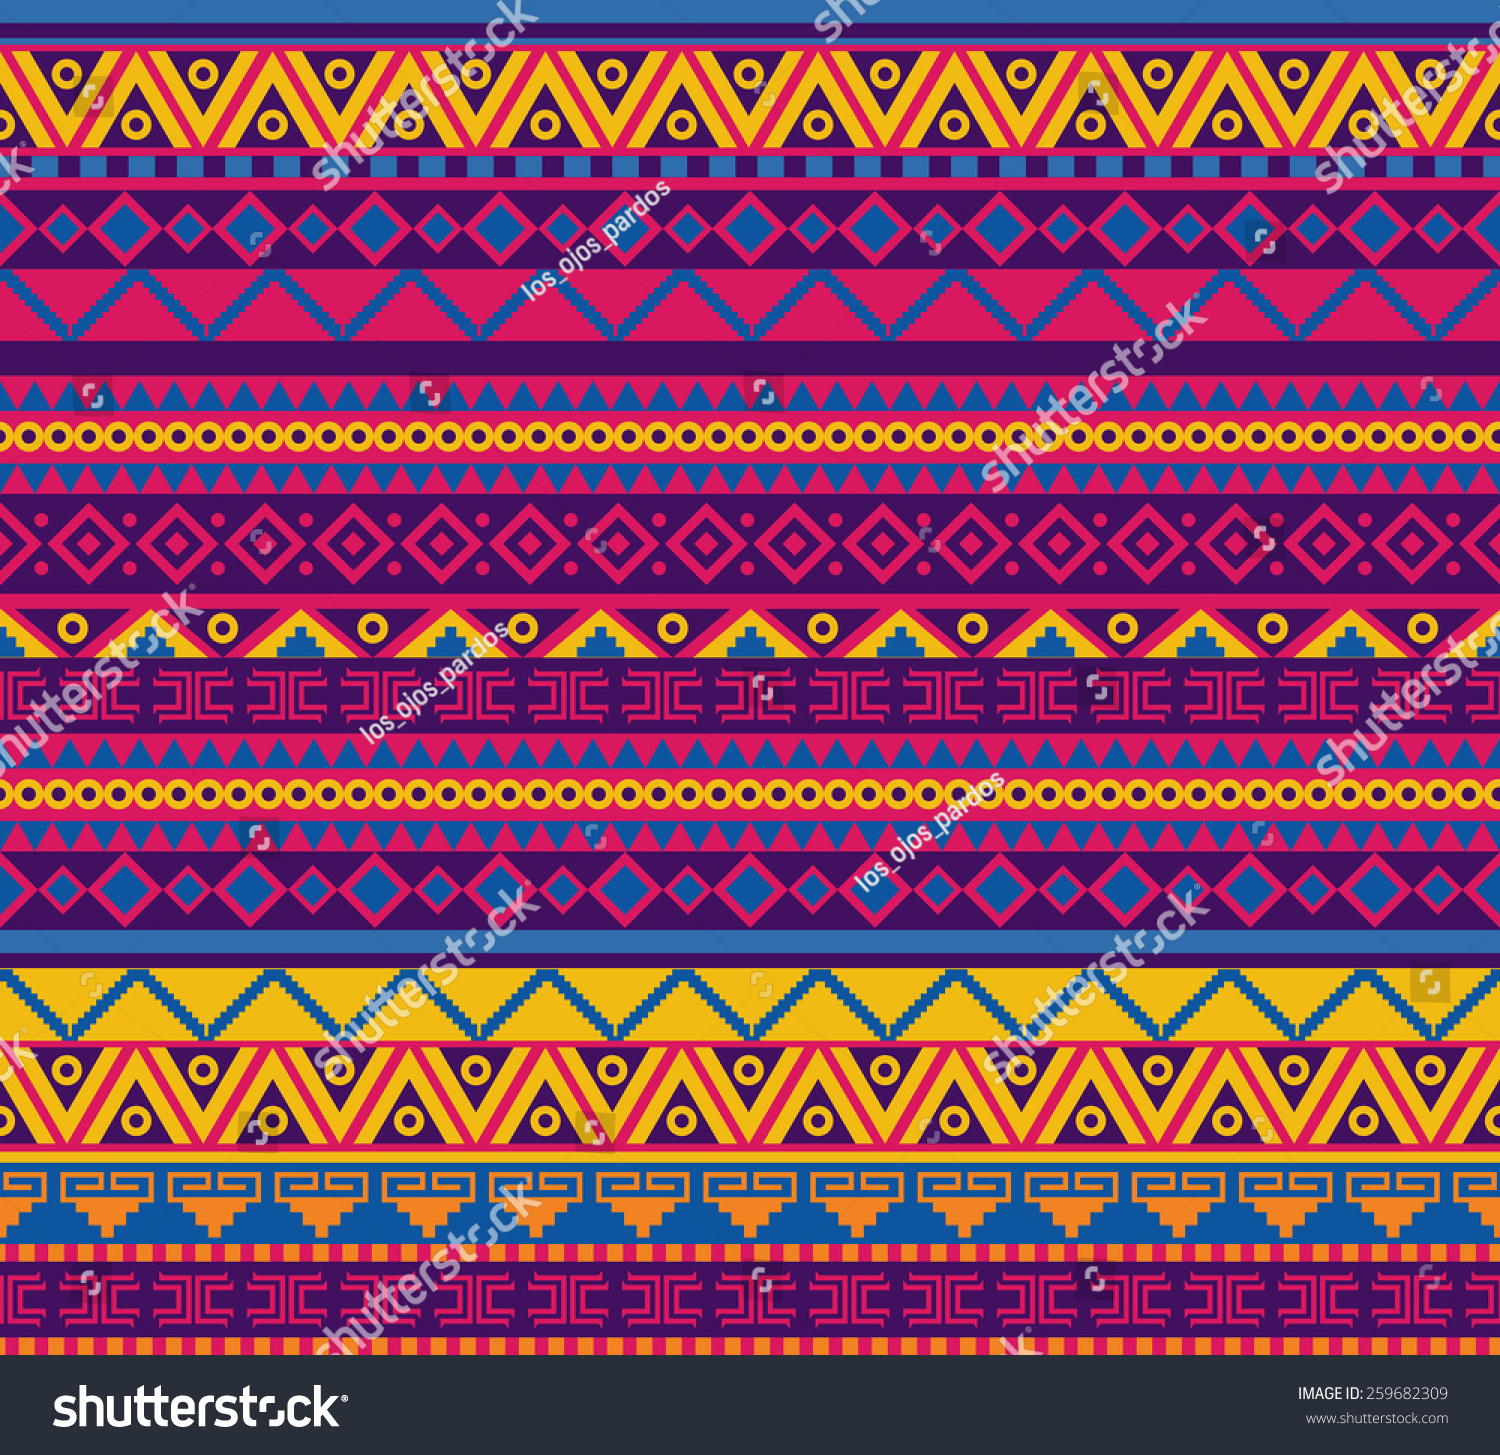 Bright Vector Seamless Pattern In Mexican Style - 259682309 : Shutterstock